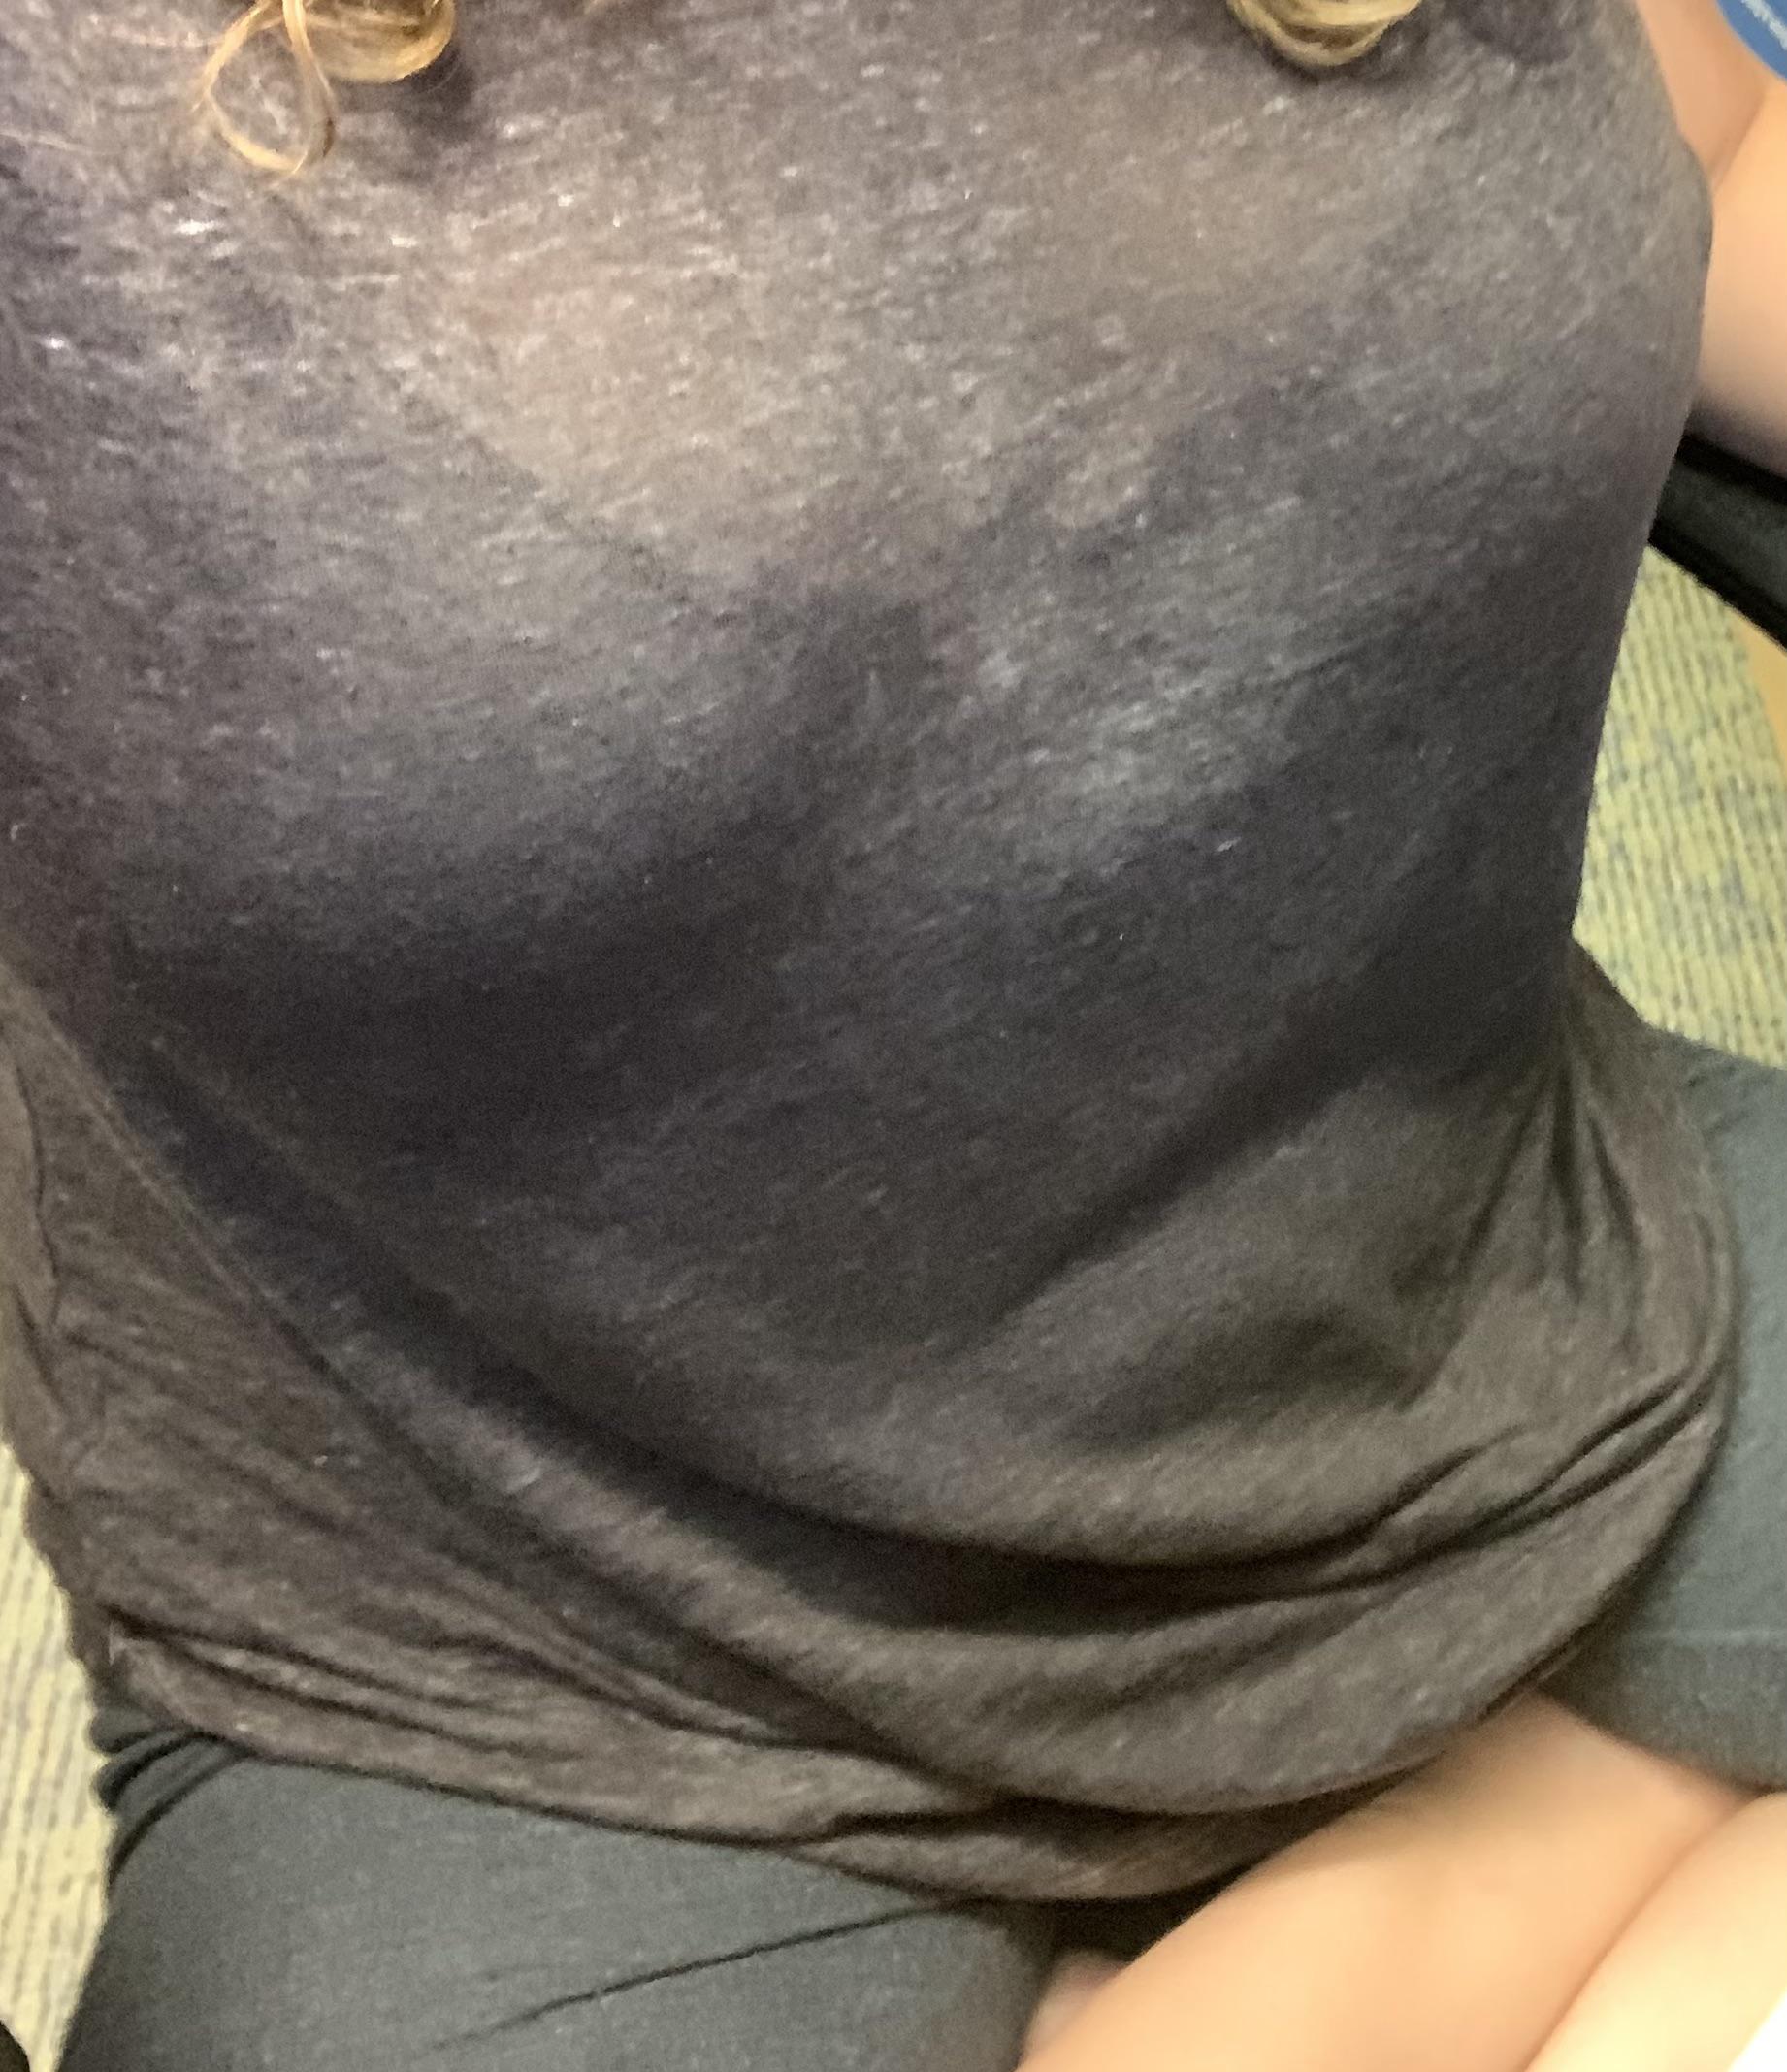 Is this too see through for work in an office? (Not very exciting, just need advice)